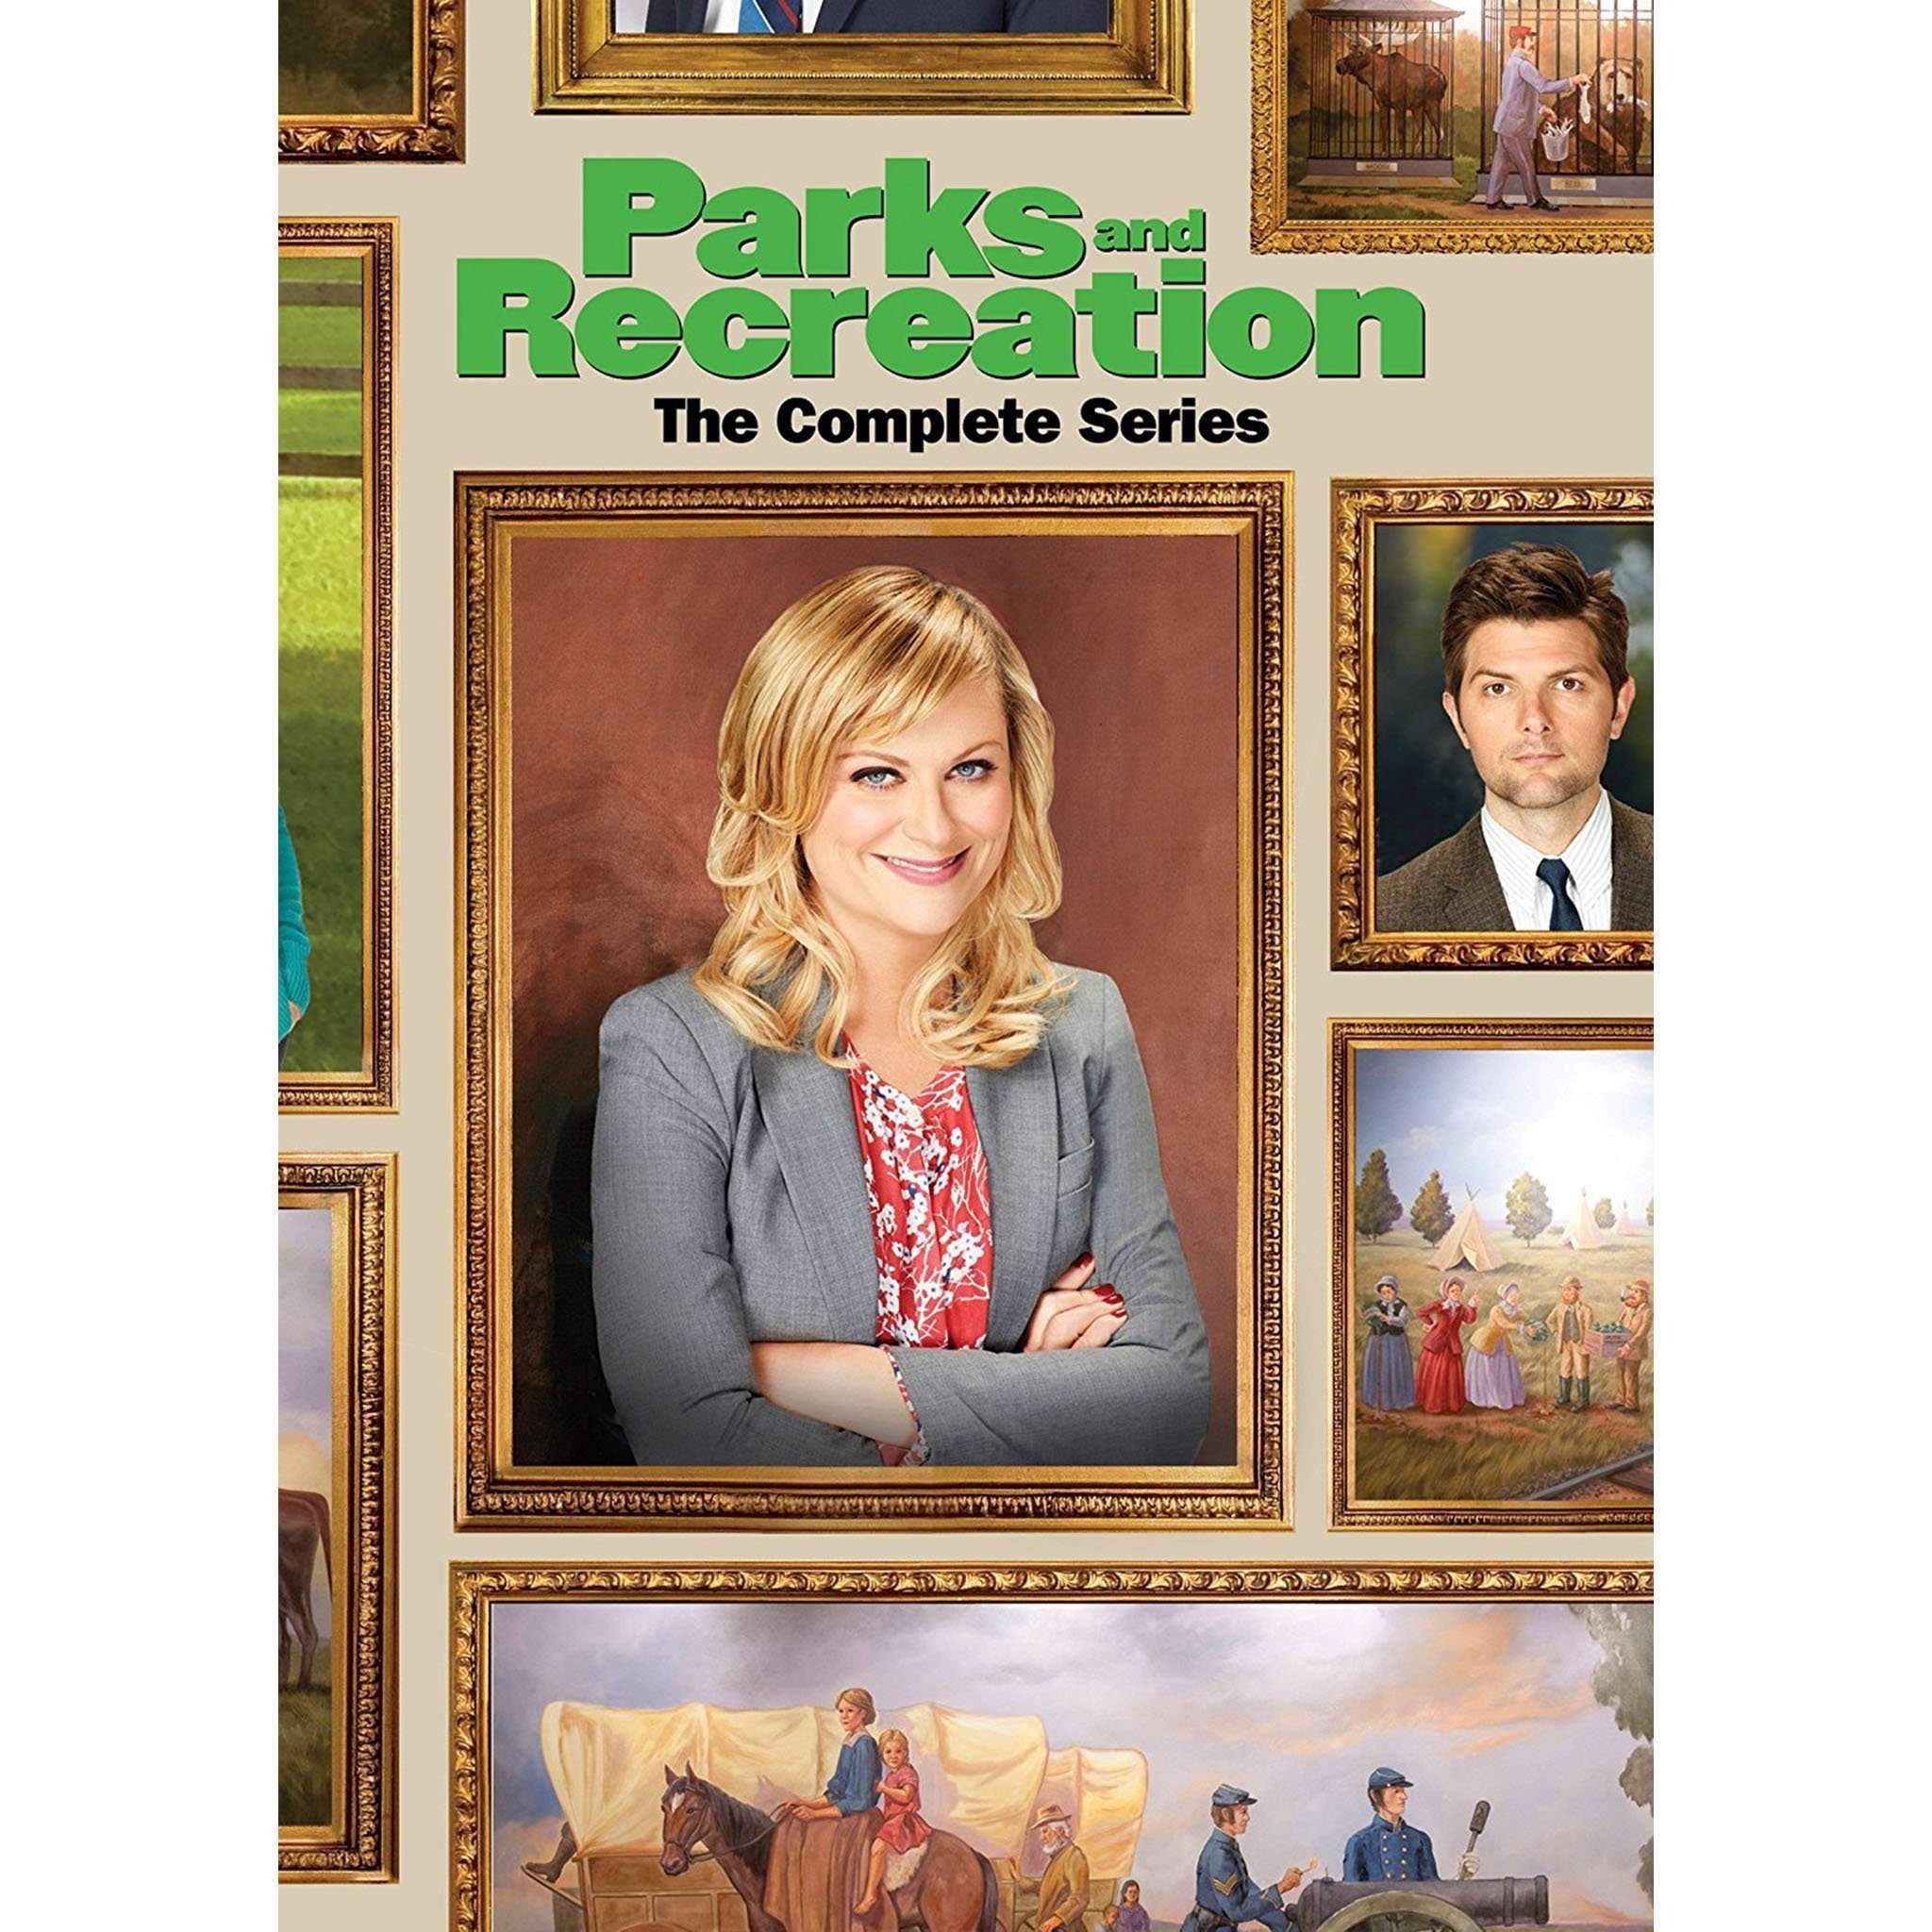 Parks and Recreation DVD Complete Series Box Set Universal Studios DVDs & Blu-ray Discs > DVDs > Box Sets